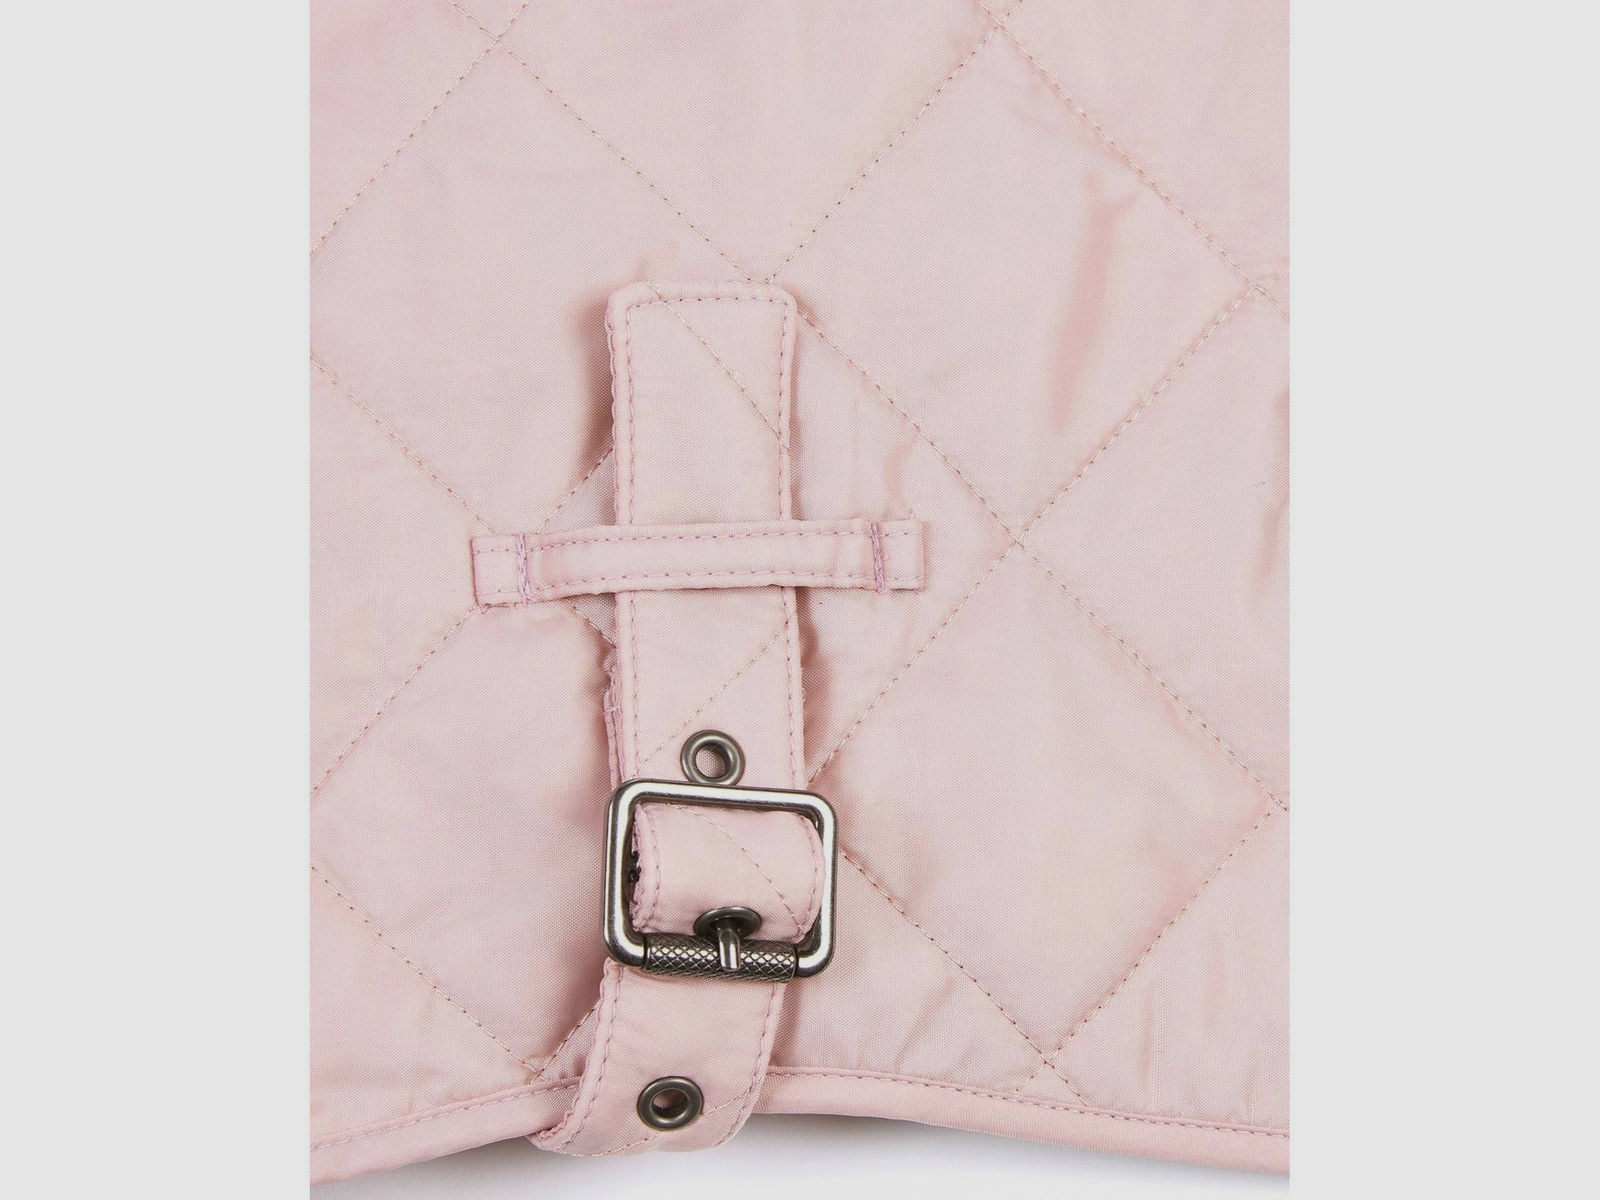 Barbour Hundemantel Quilted, Farbe Pink XS